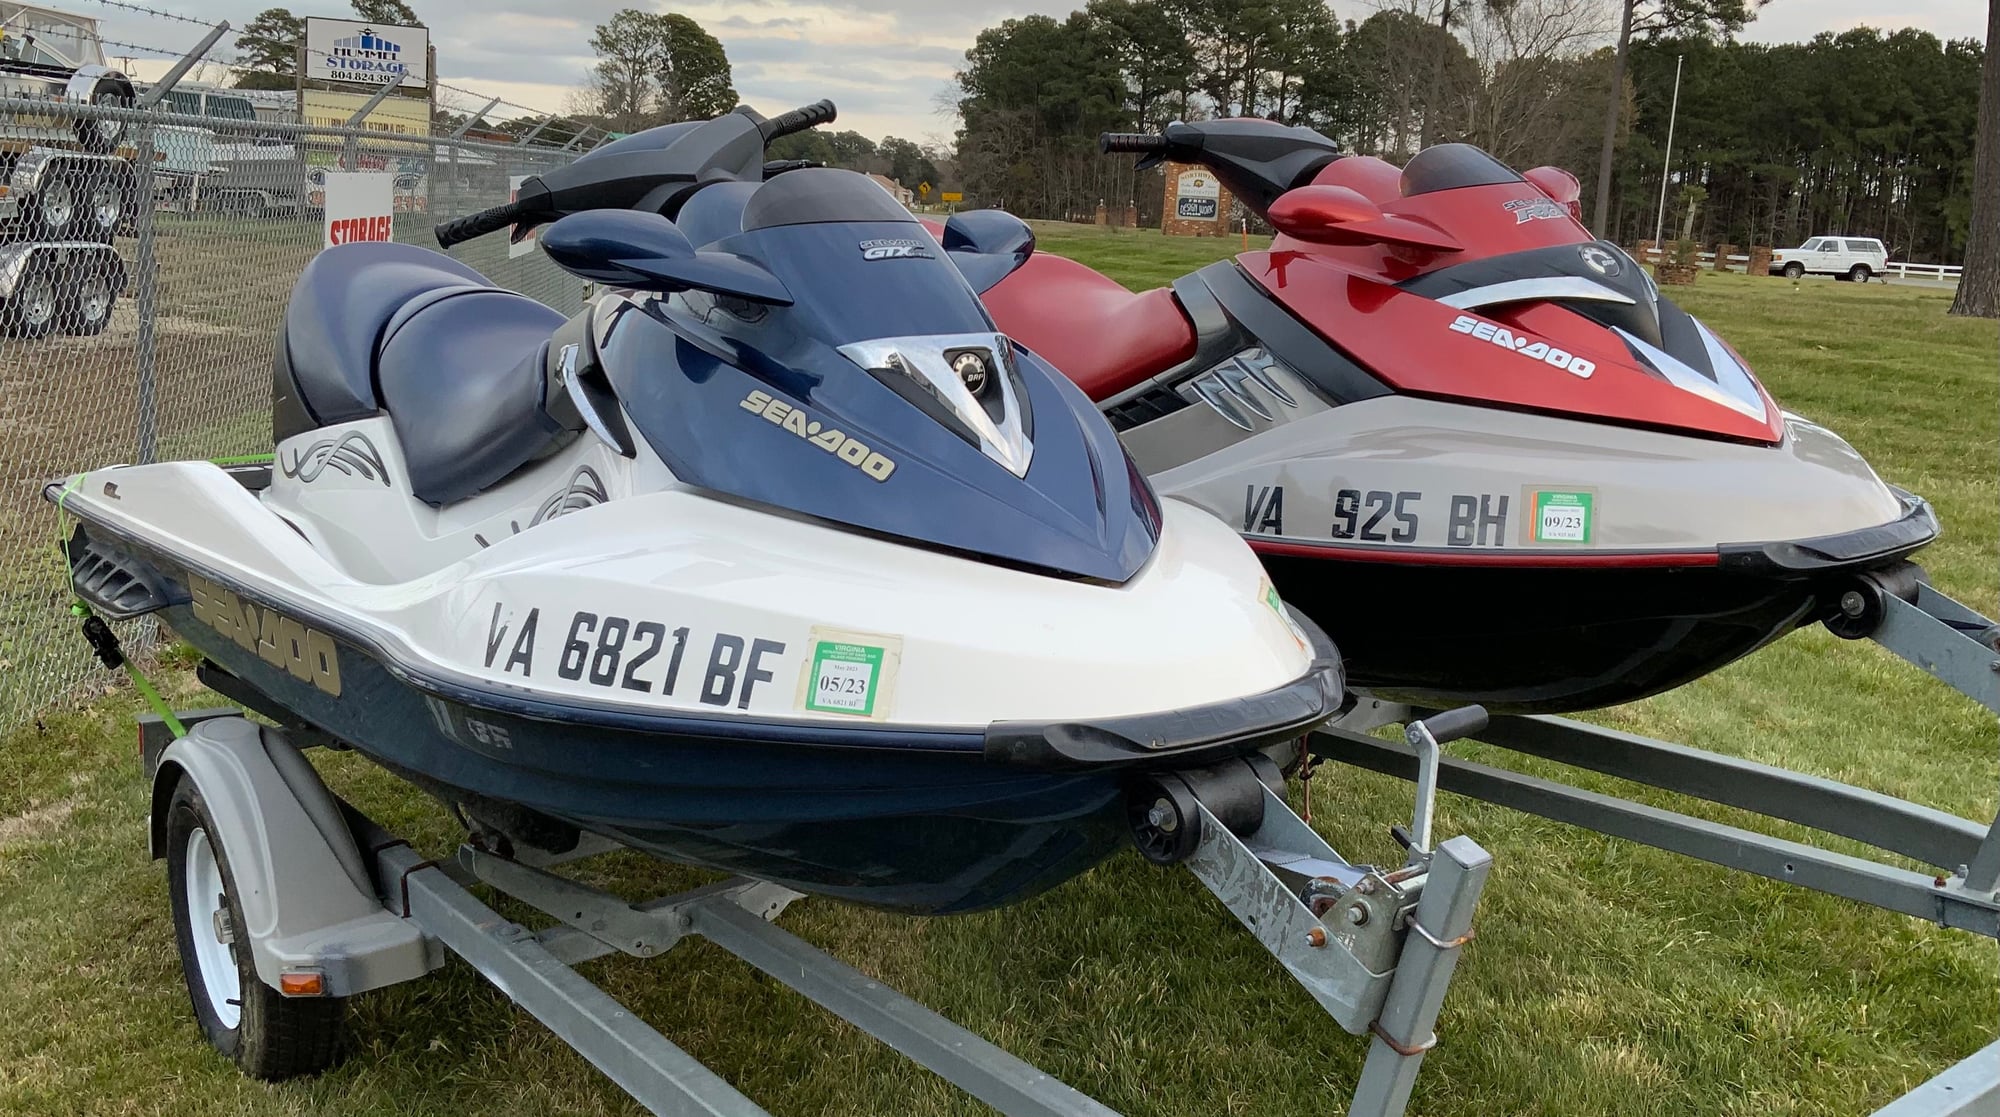 2005 TWIN Sea-Doo jet skis - The Hull Truth - Boating and Fishing